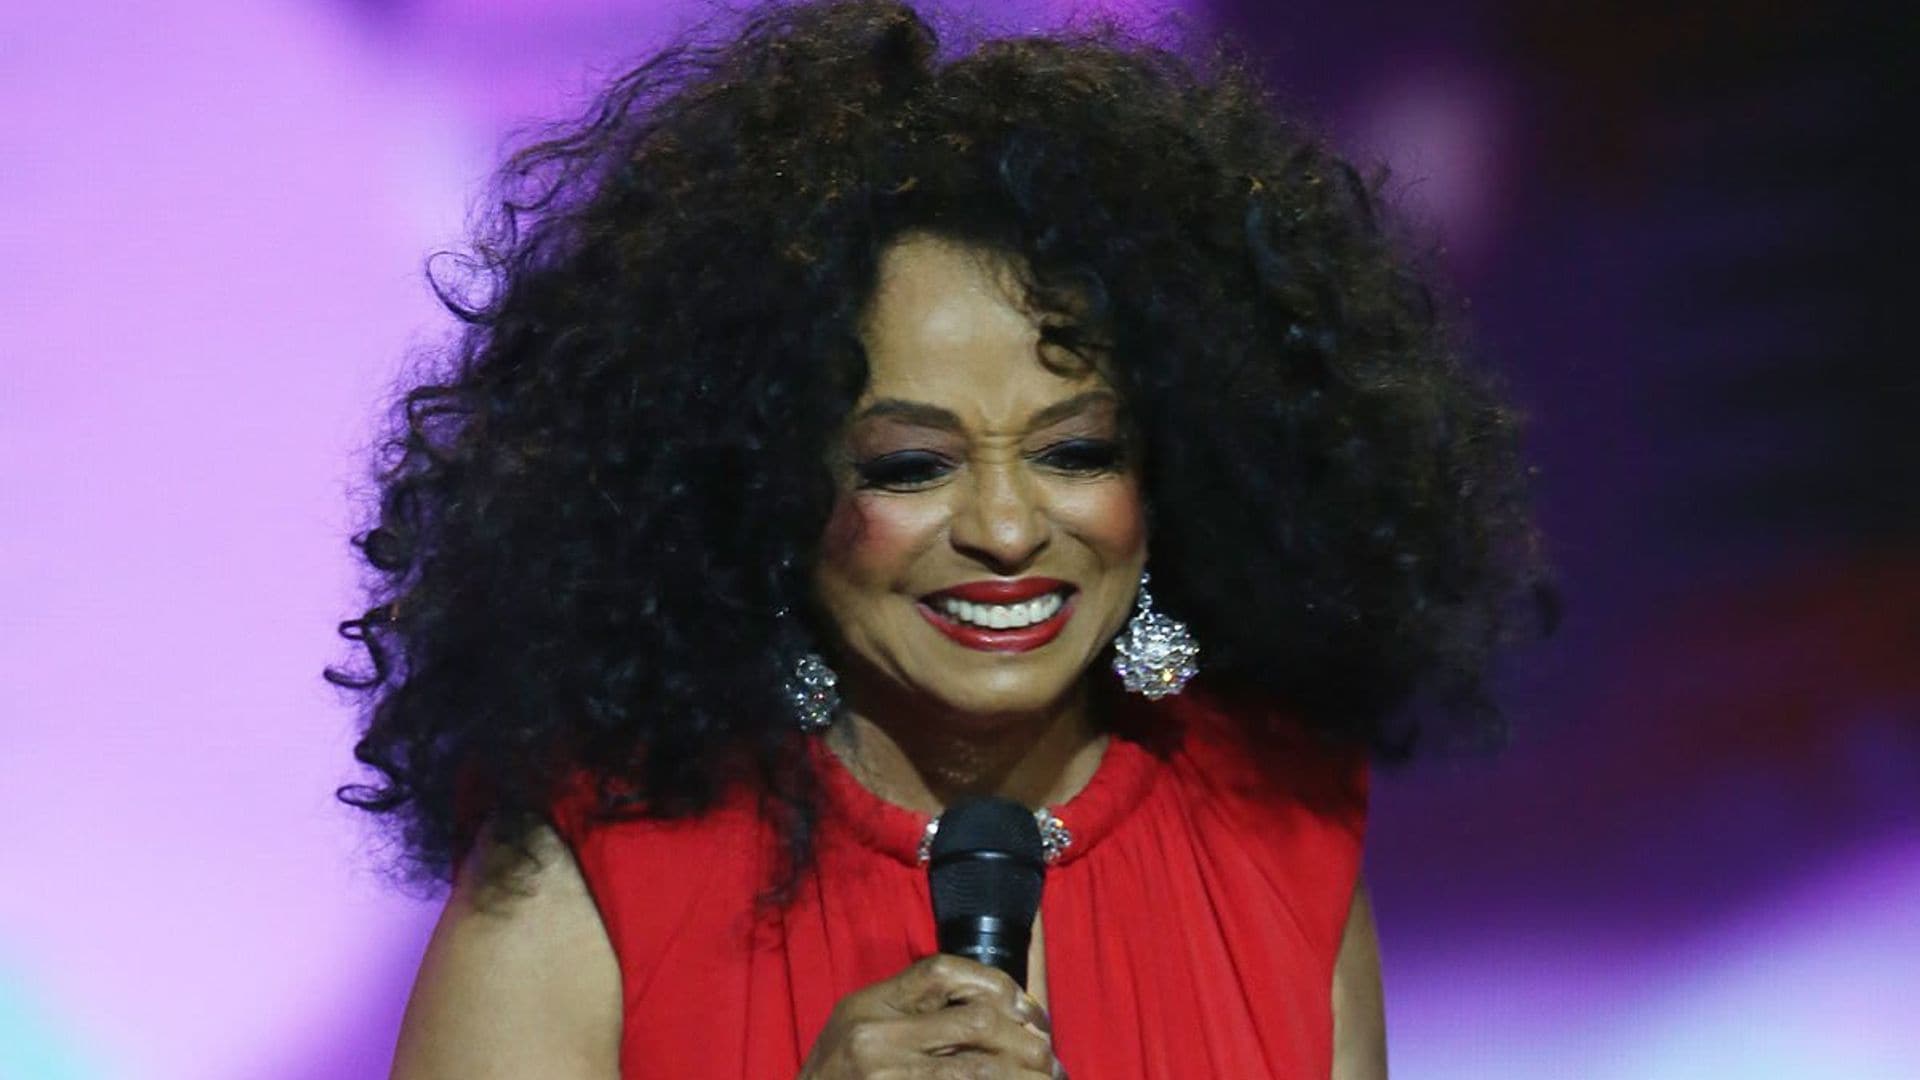 Diana Ross got inspiration for her new album from an unlikely source